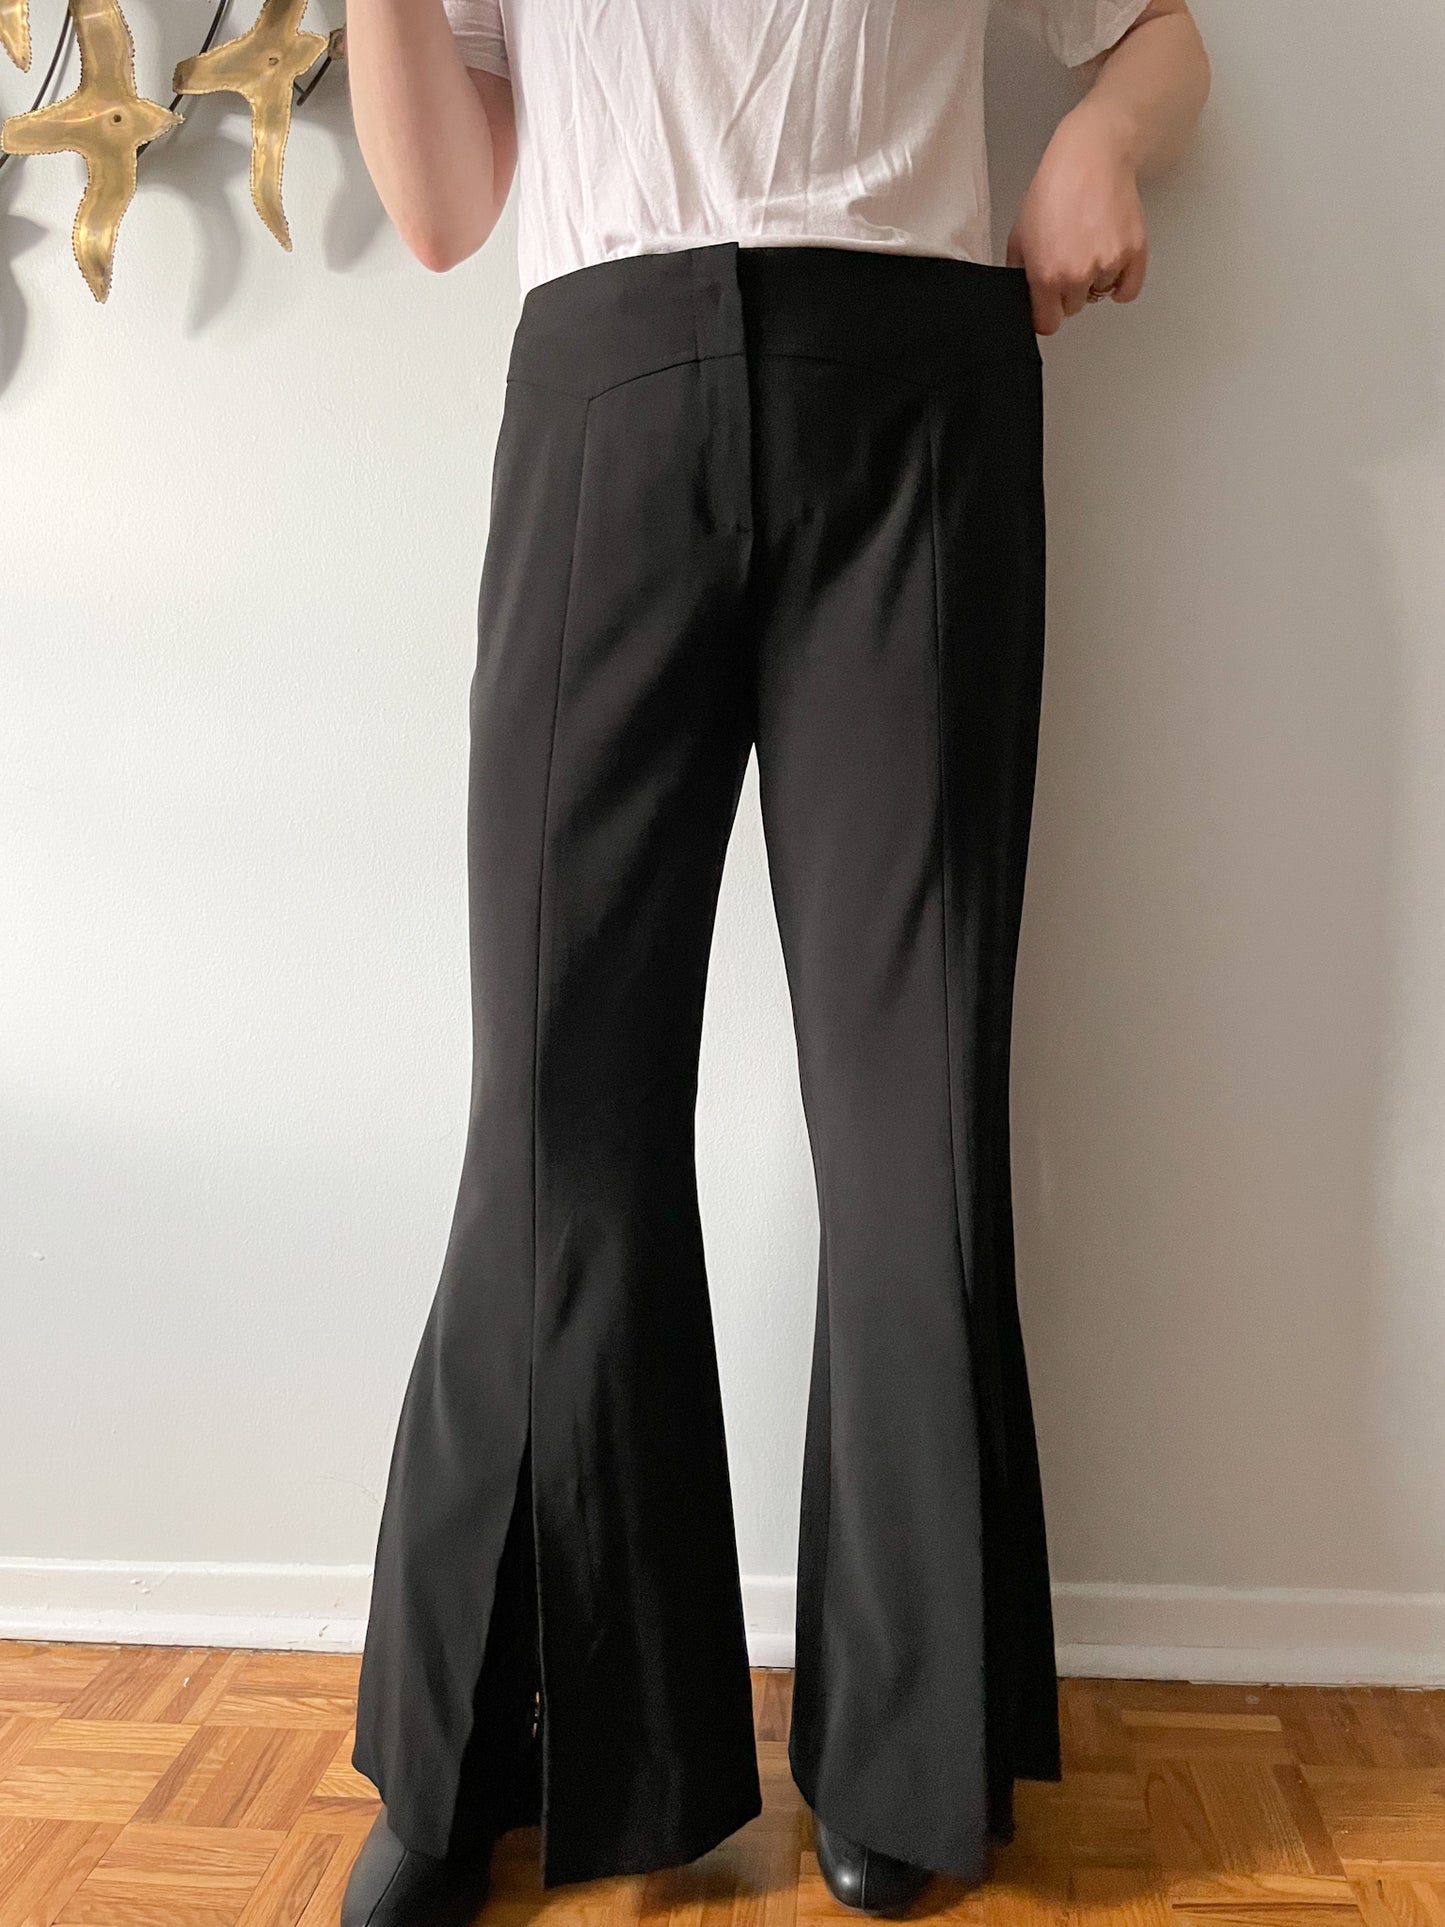 Miss Tic Black High Rise Lace High Rise Flare Trouser Pants - Large